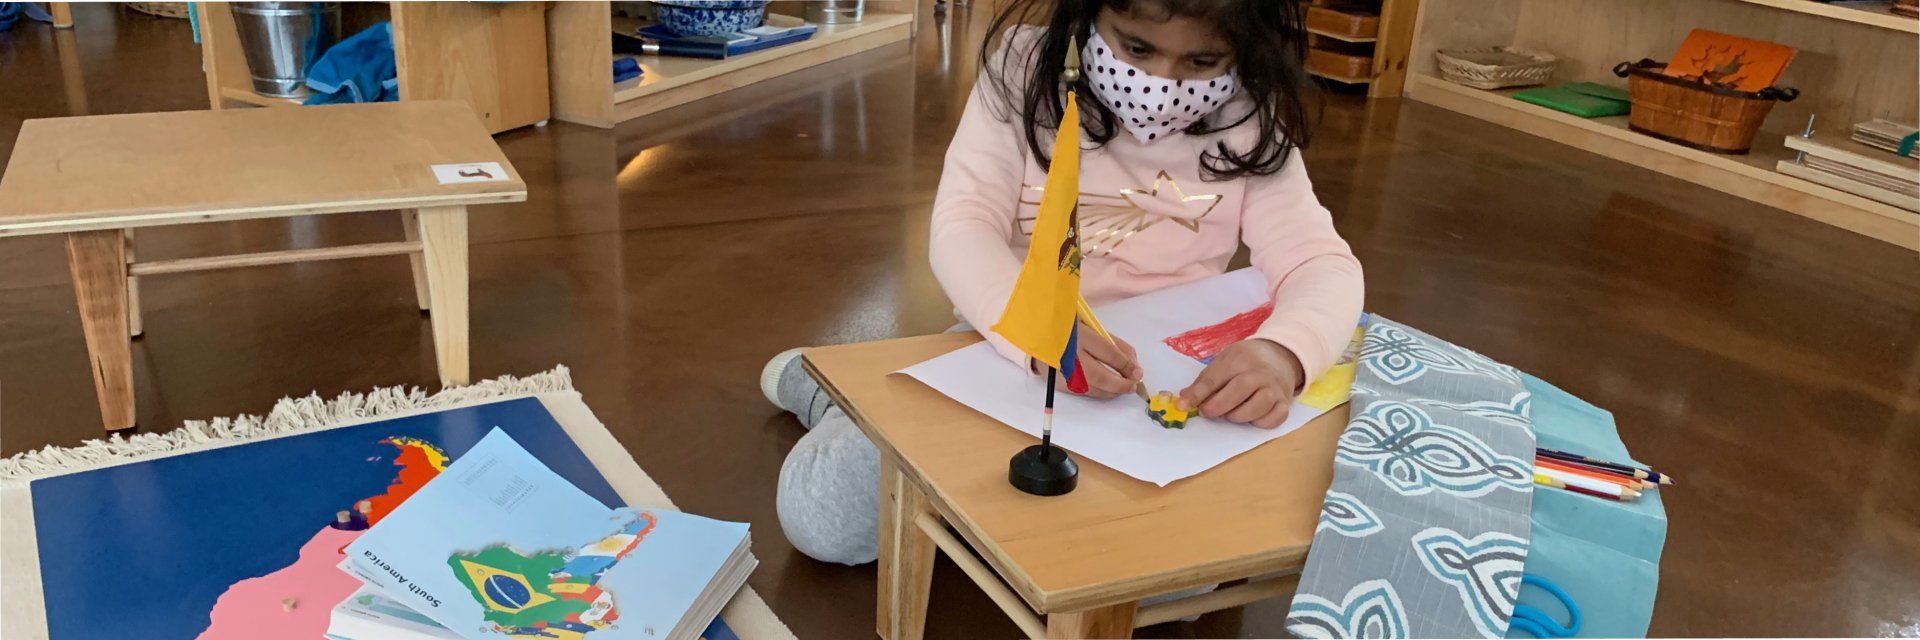 Preschool aged child with continents map and national flags